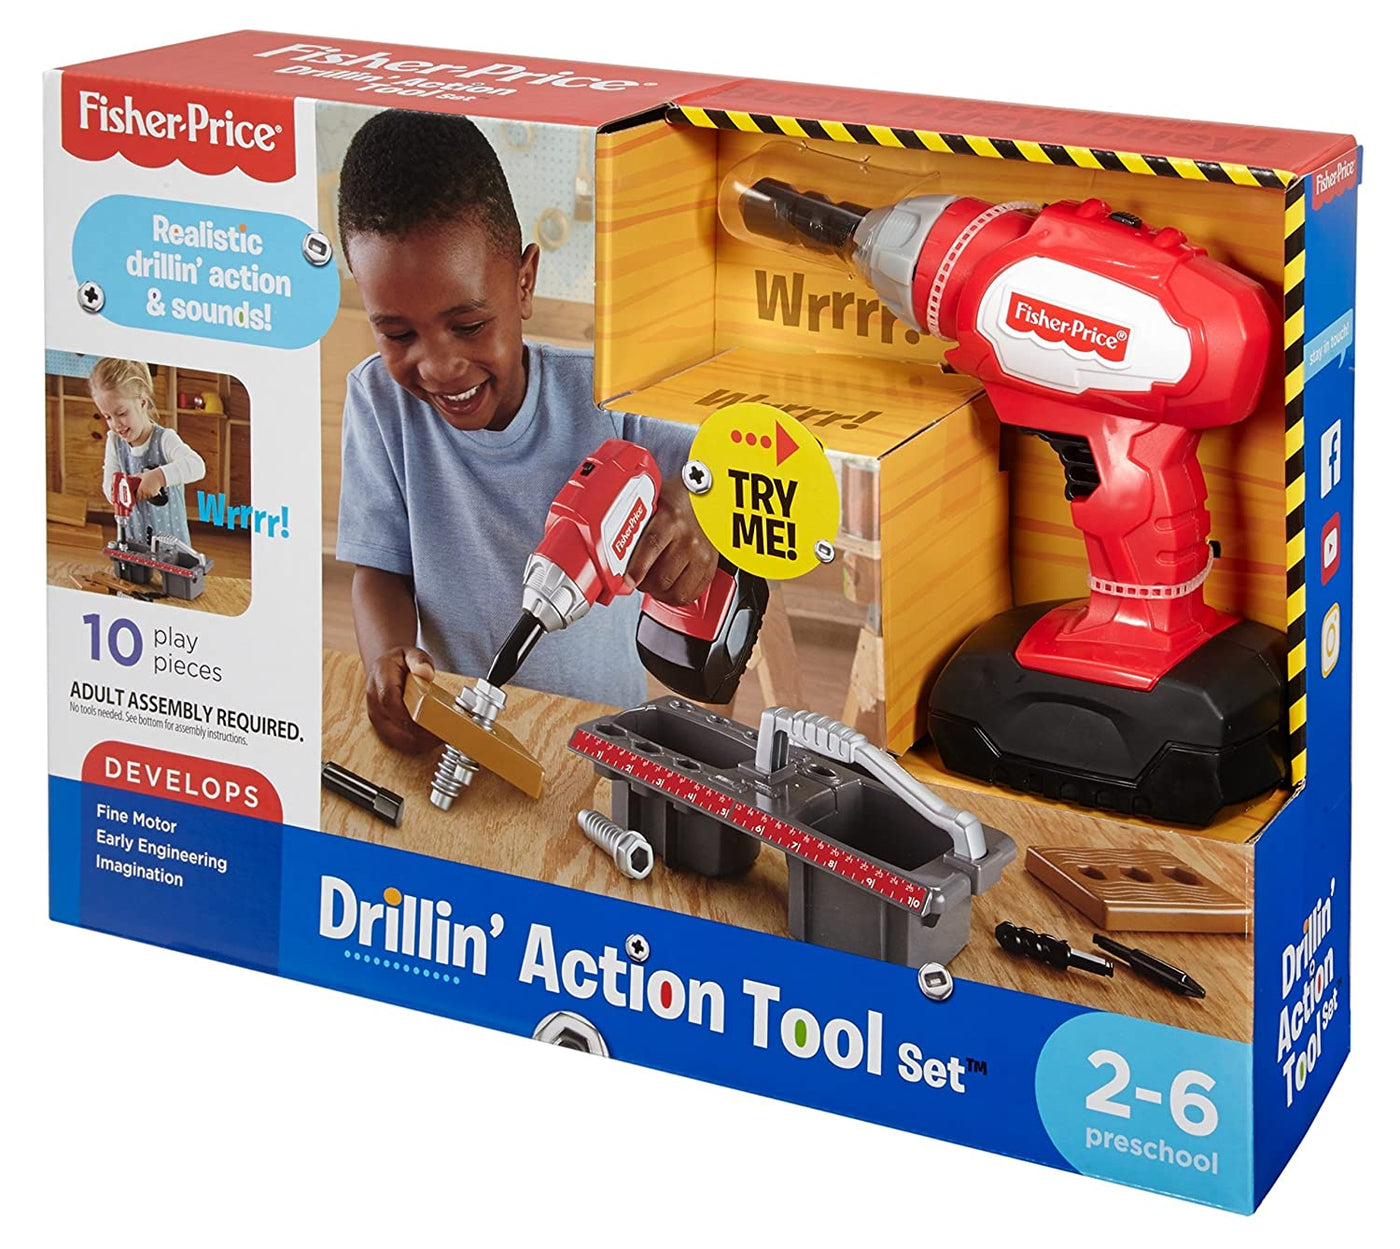 Drillin' Action Tool Set | Fisher Price